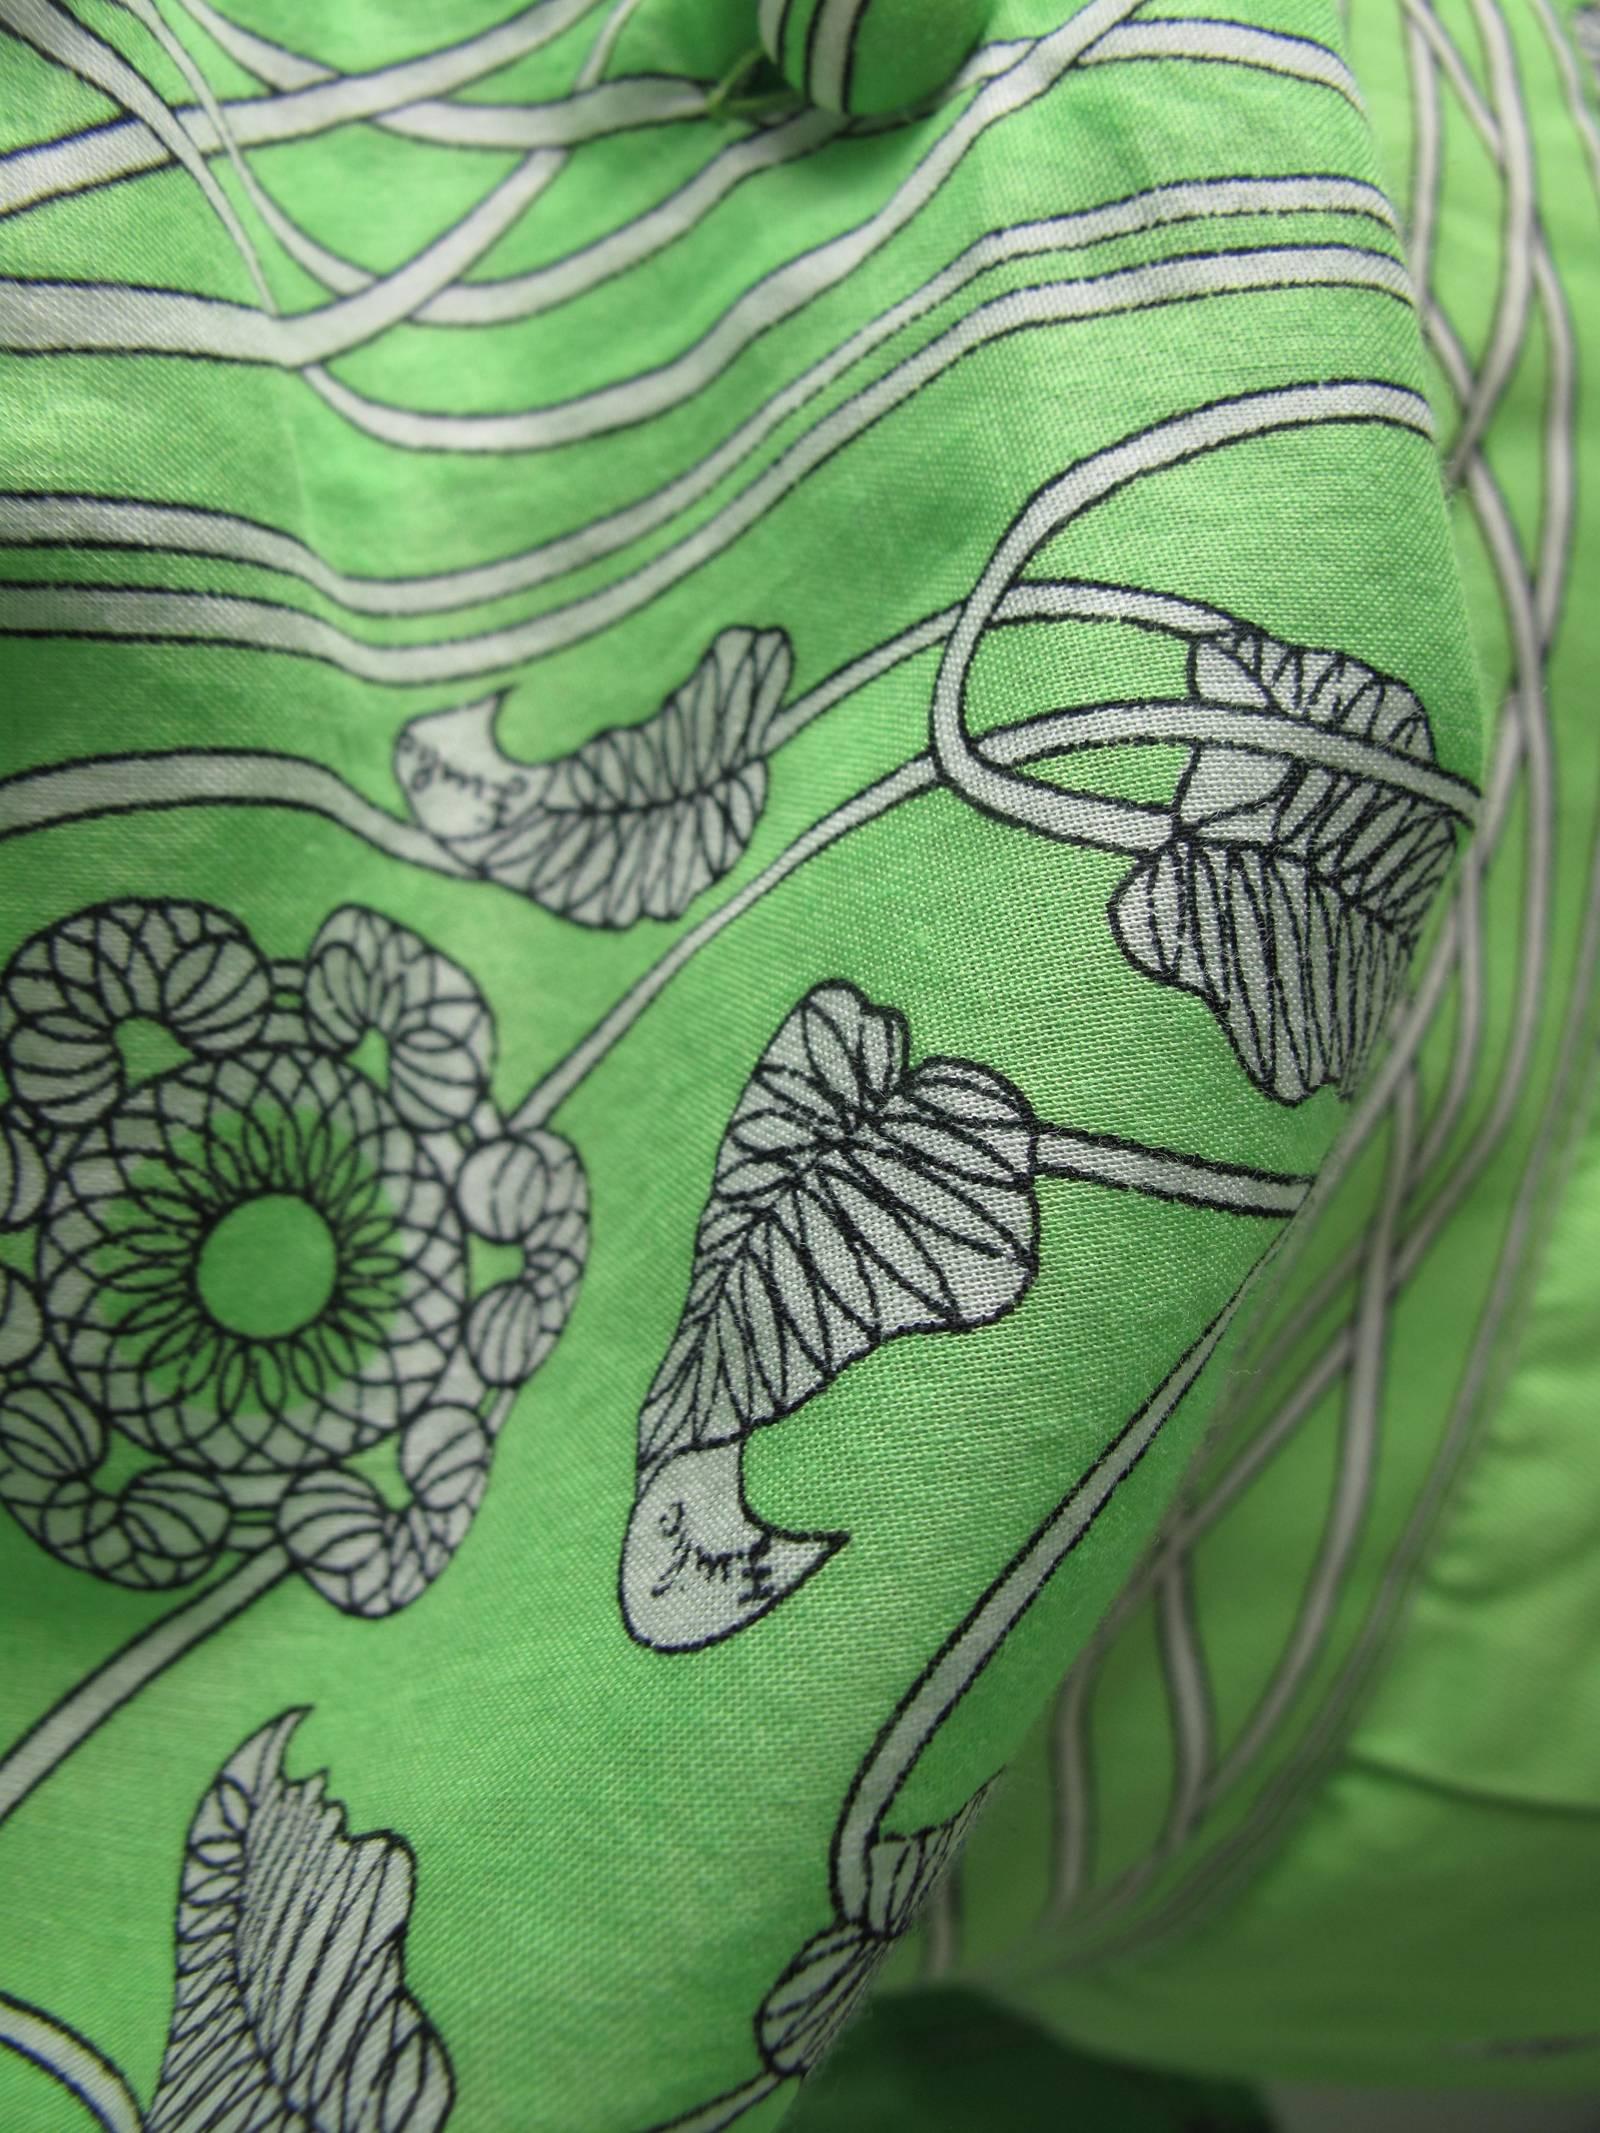 1960s Emilio Pucci green cotton skirt and blouse with floral print.  Condition: Very good, small rust spot on waistband of skirt, see photo and Faint spots on front of skirt.   Made in Italy.  Labeled Size 10 / Current US size 6

Blouse: 37